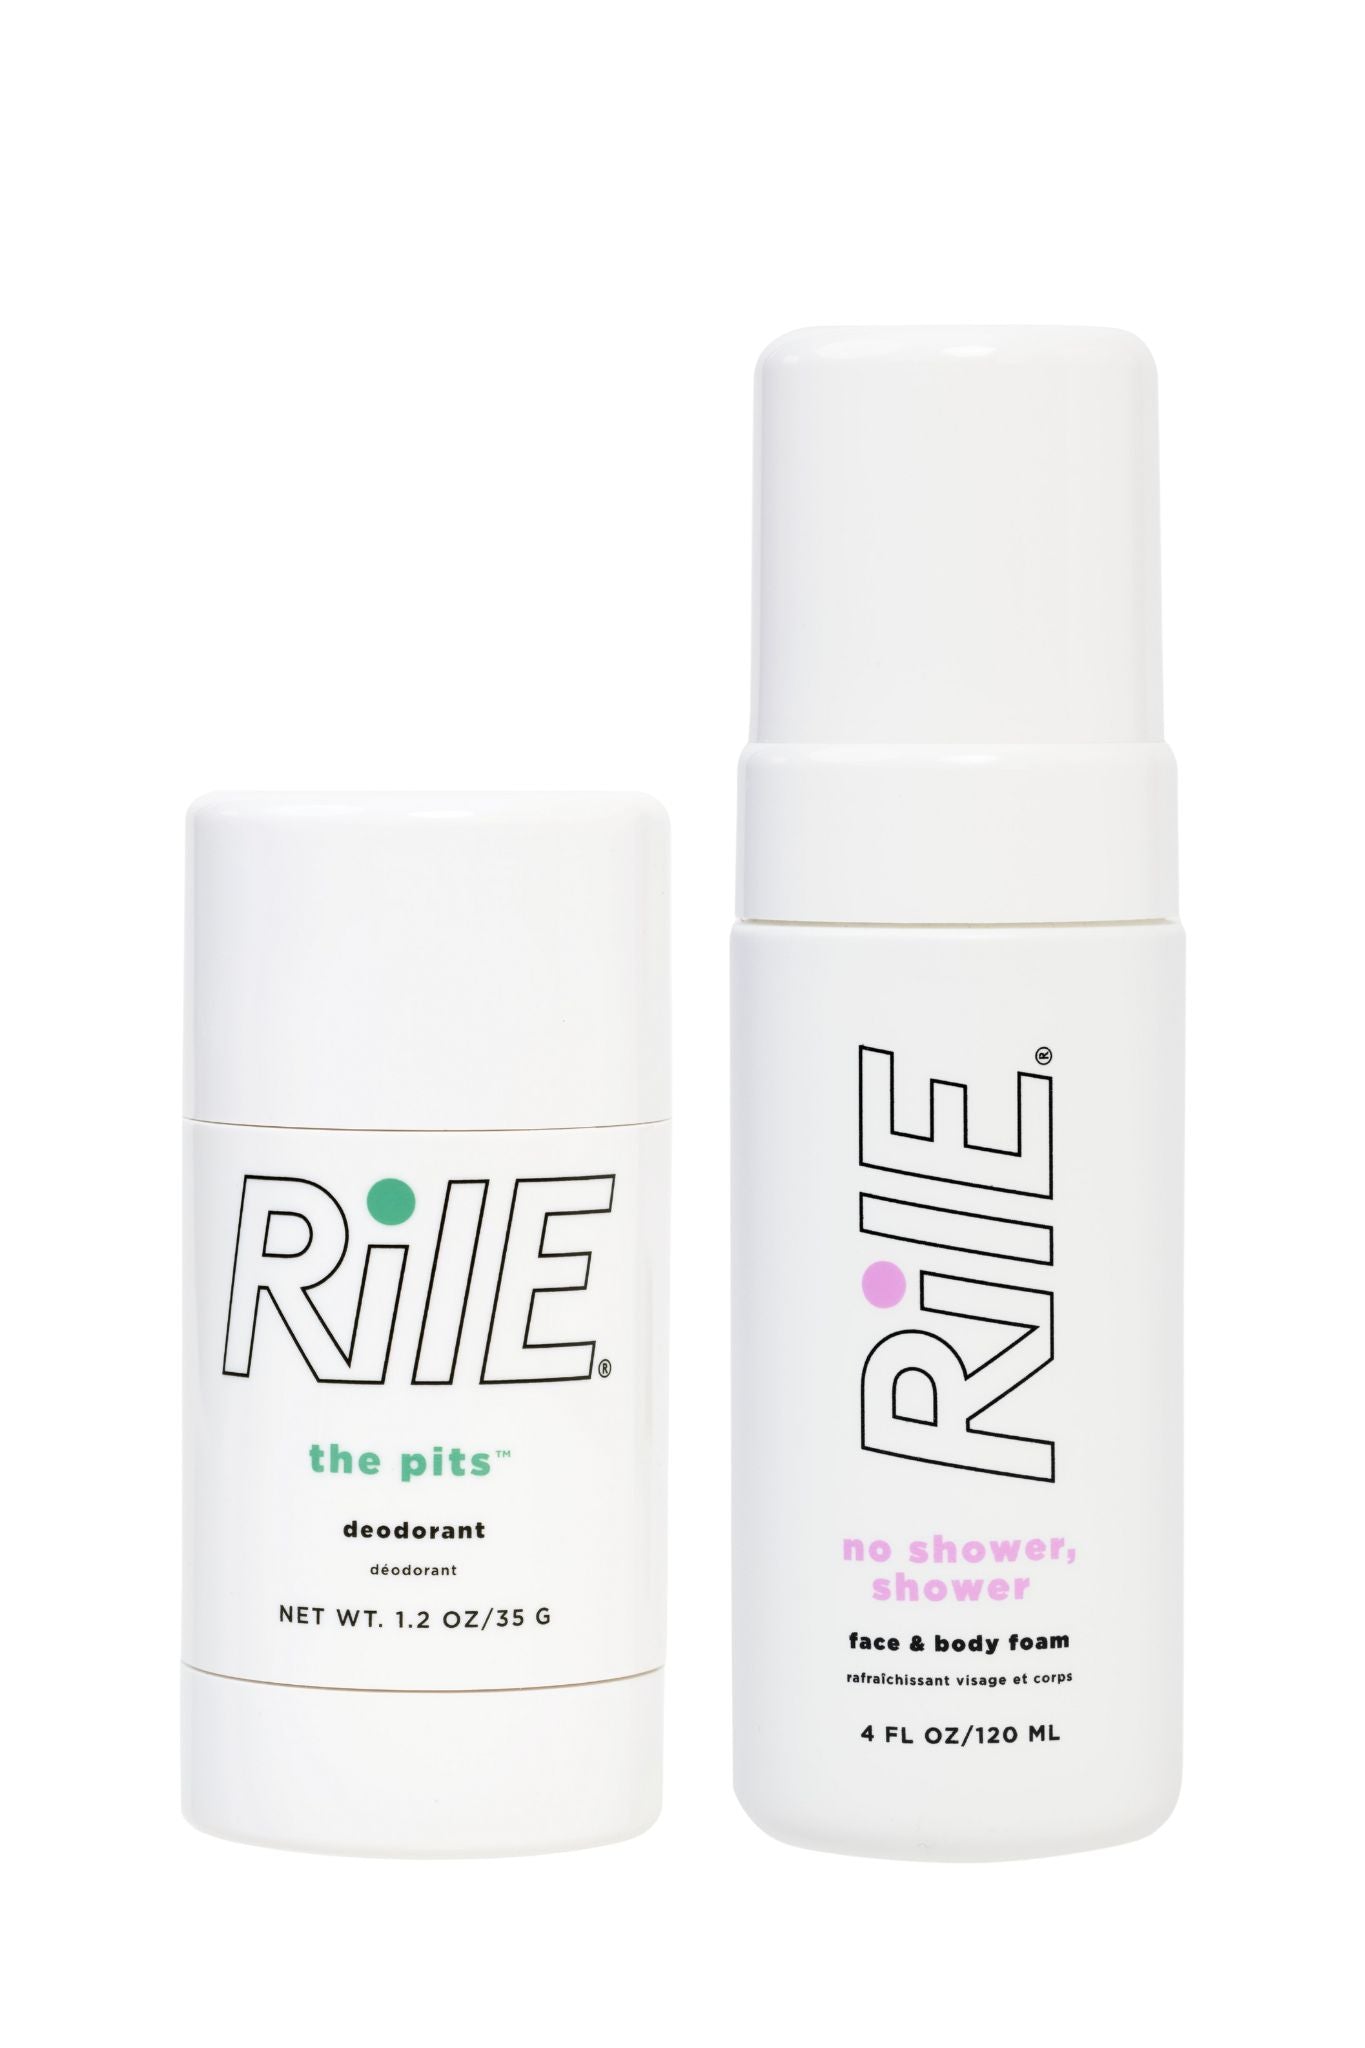 A white bottle of Rile's No Shower Shower face and body foam and white stick of Rile's deodorant.